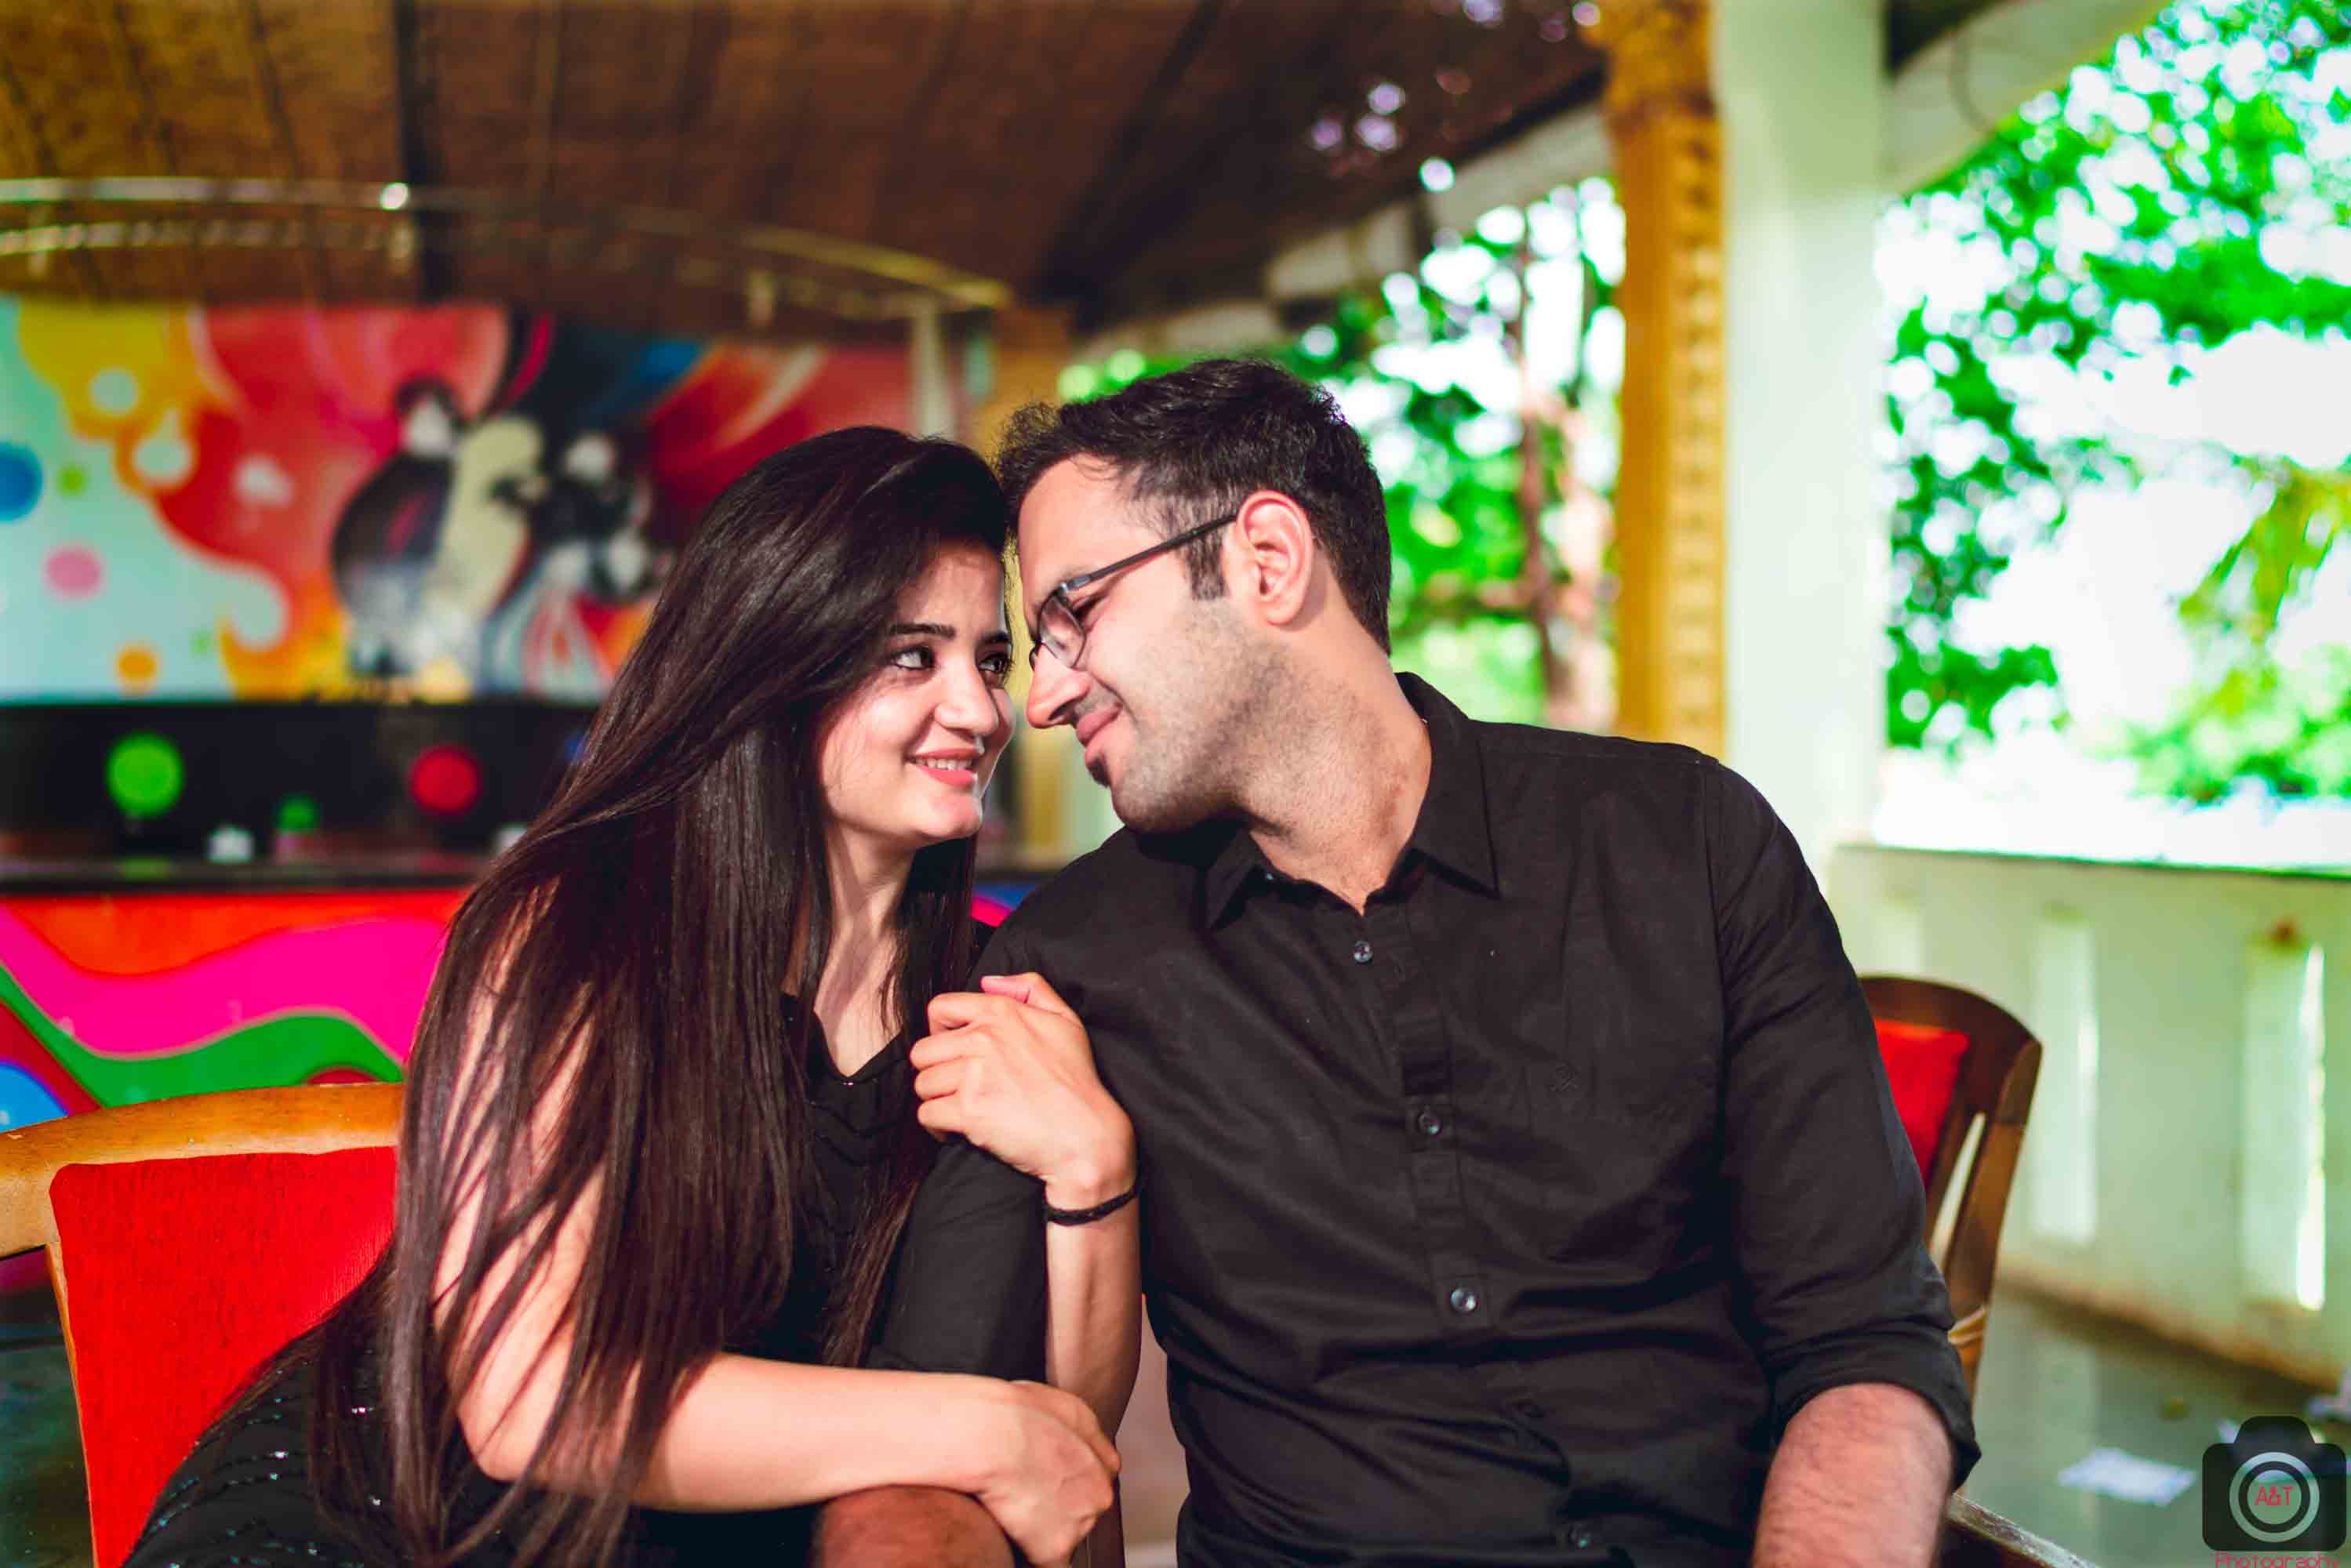 Candid Pre-wedding Poses|Shilpa & Pulkit| A&T Photography| Best Pre-wedding Photographer in Pune, India